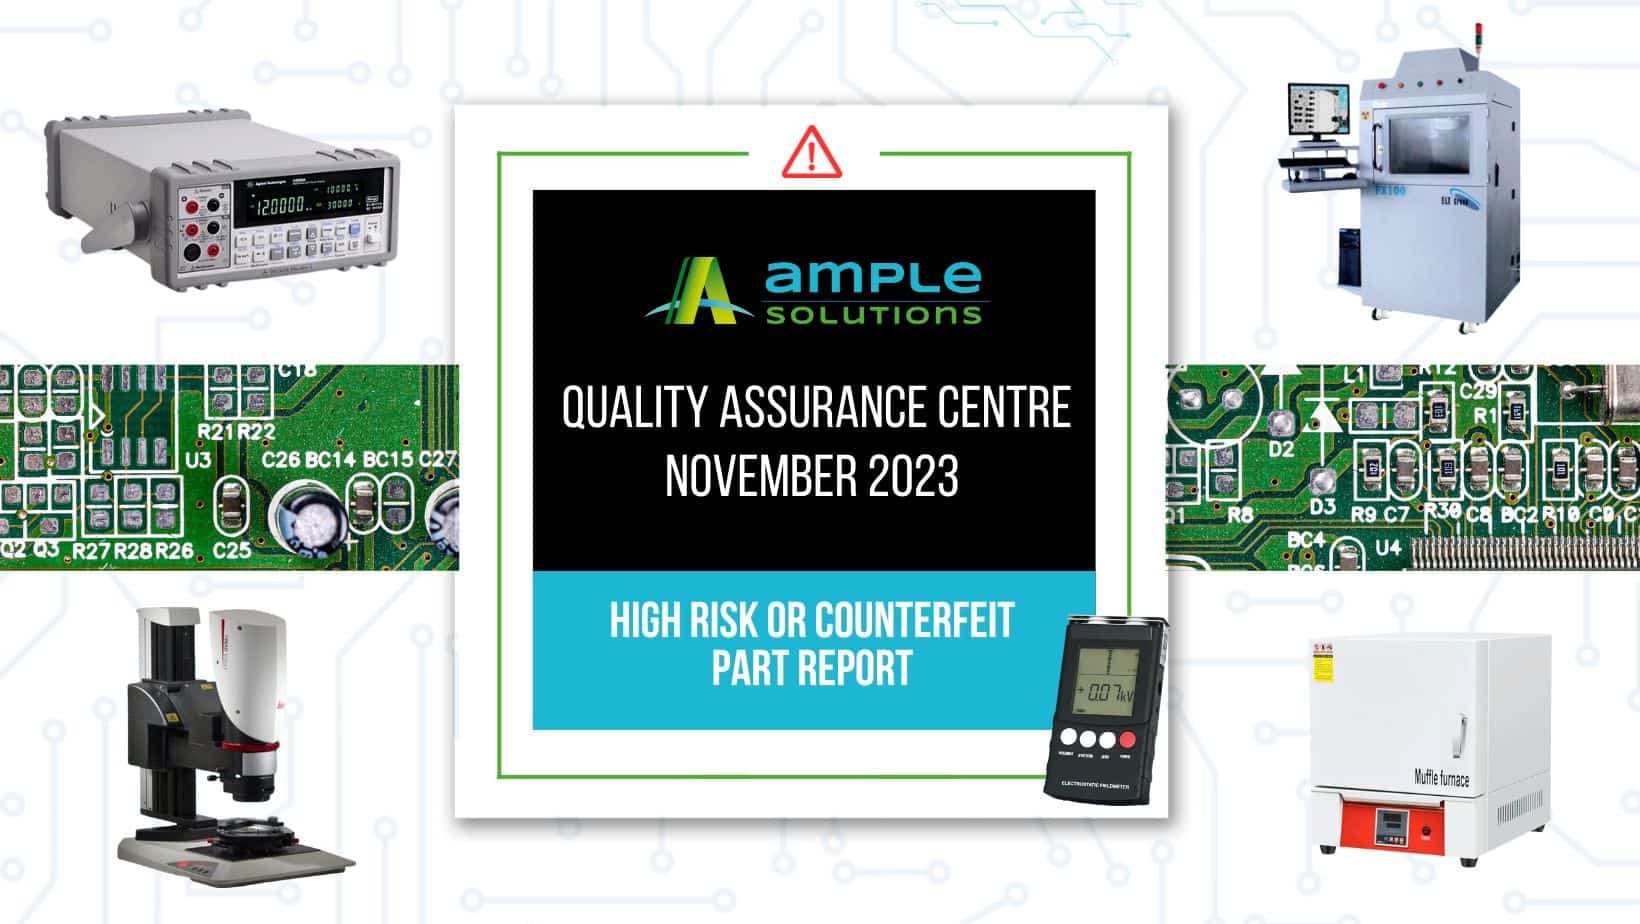 November 2023 Edition Ample Solutions Quality Assurance Centre High-risk or Counterfeit Part Two Semiconductor Report